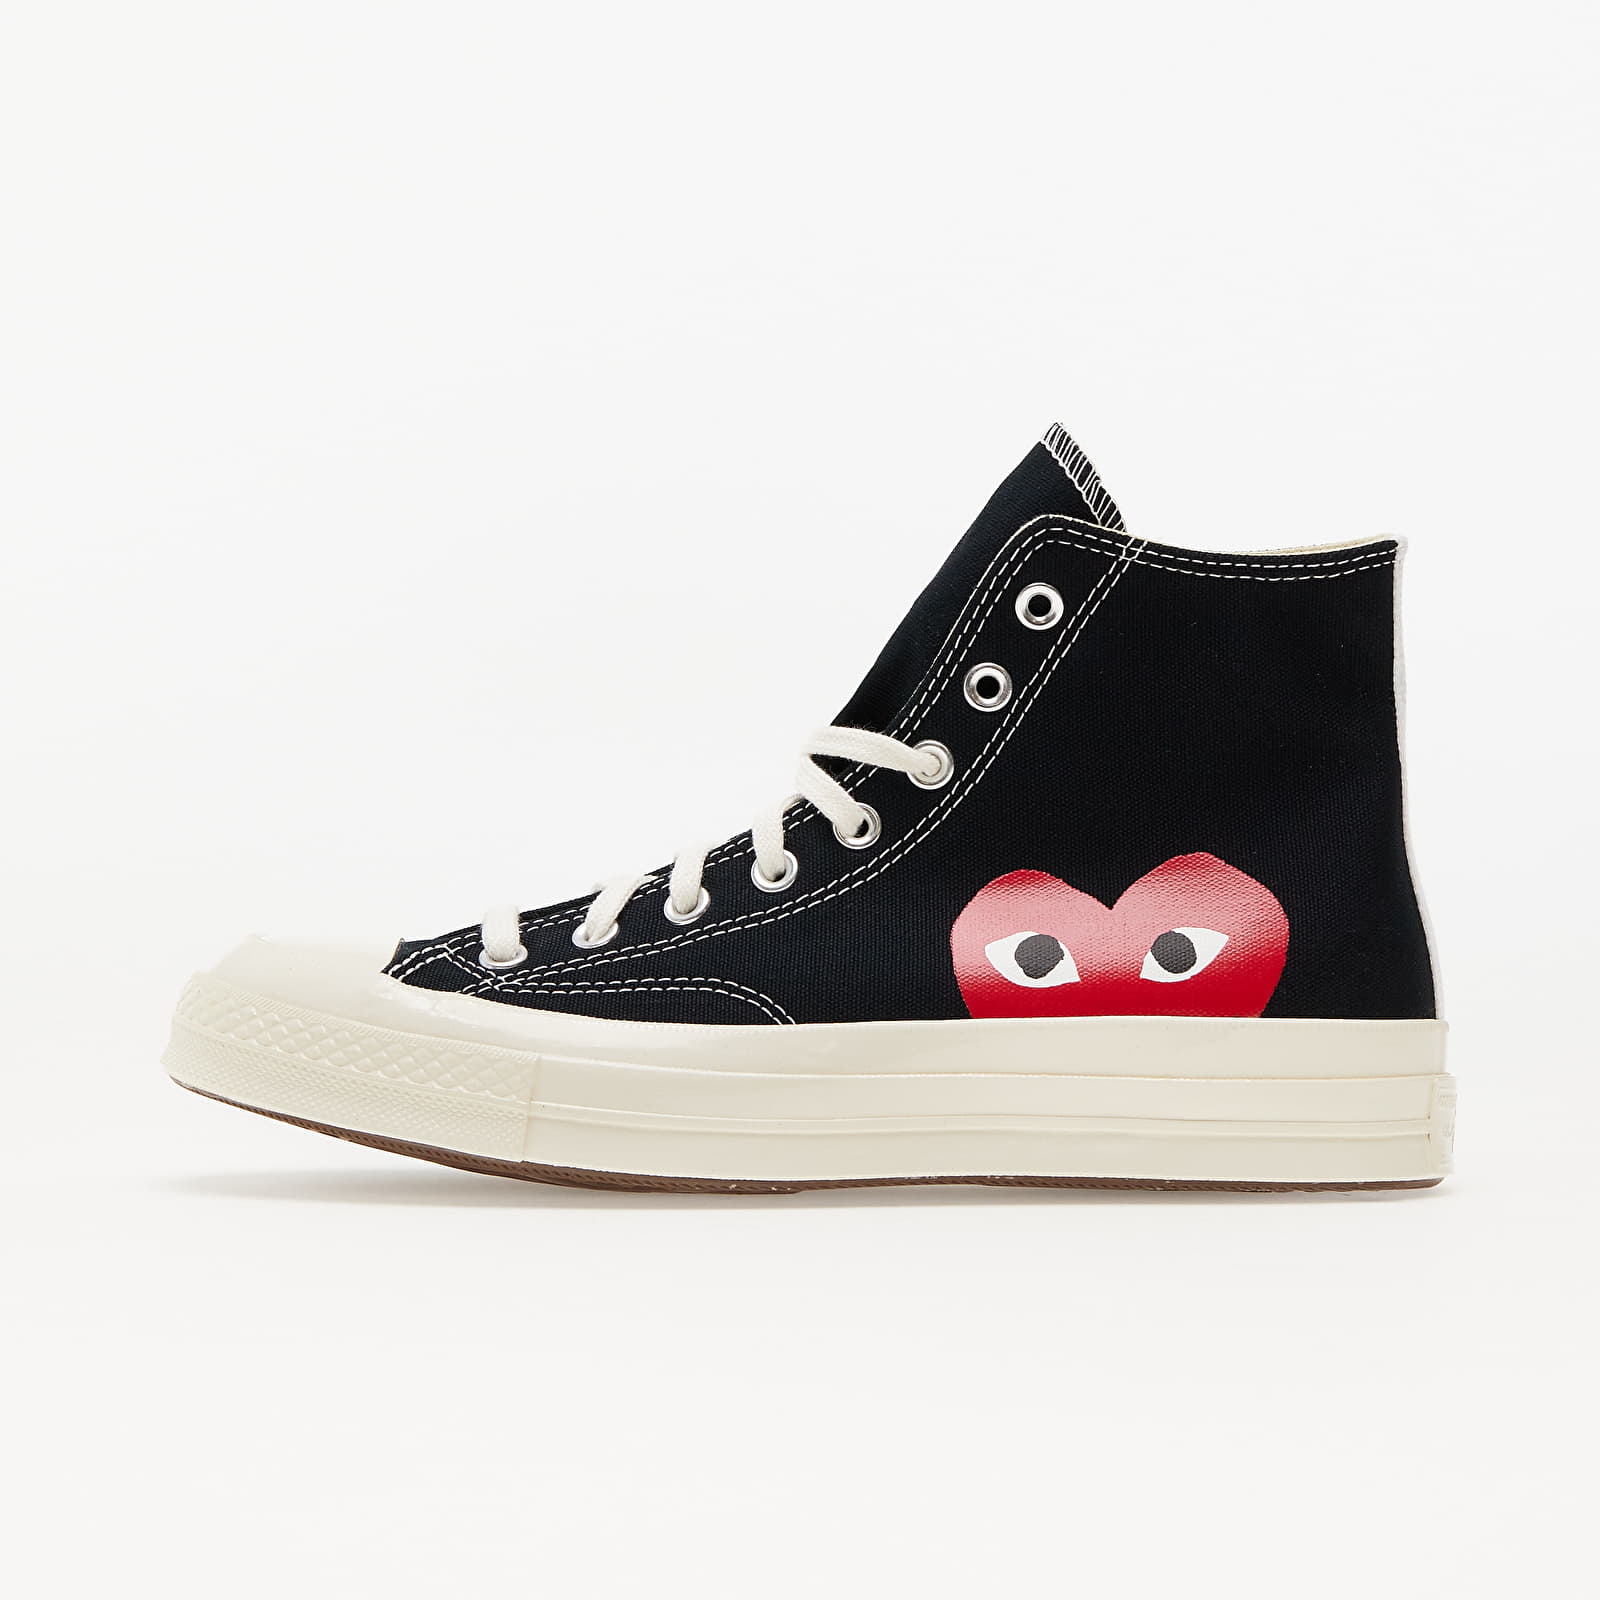 Converse x Comme des Garcons PLAY Chuck 70 Hi Black/ White/ High Risk Red